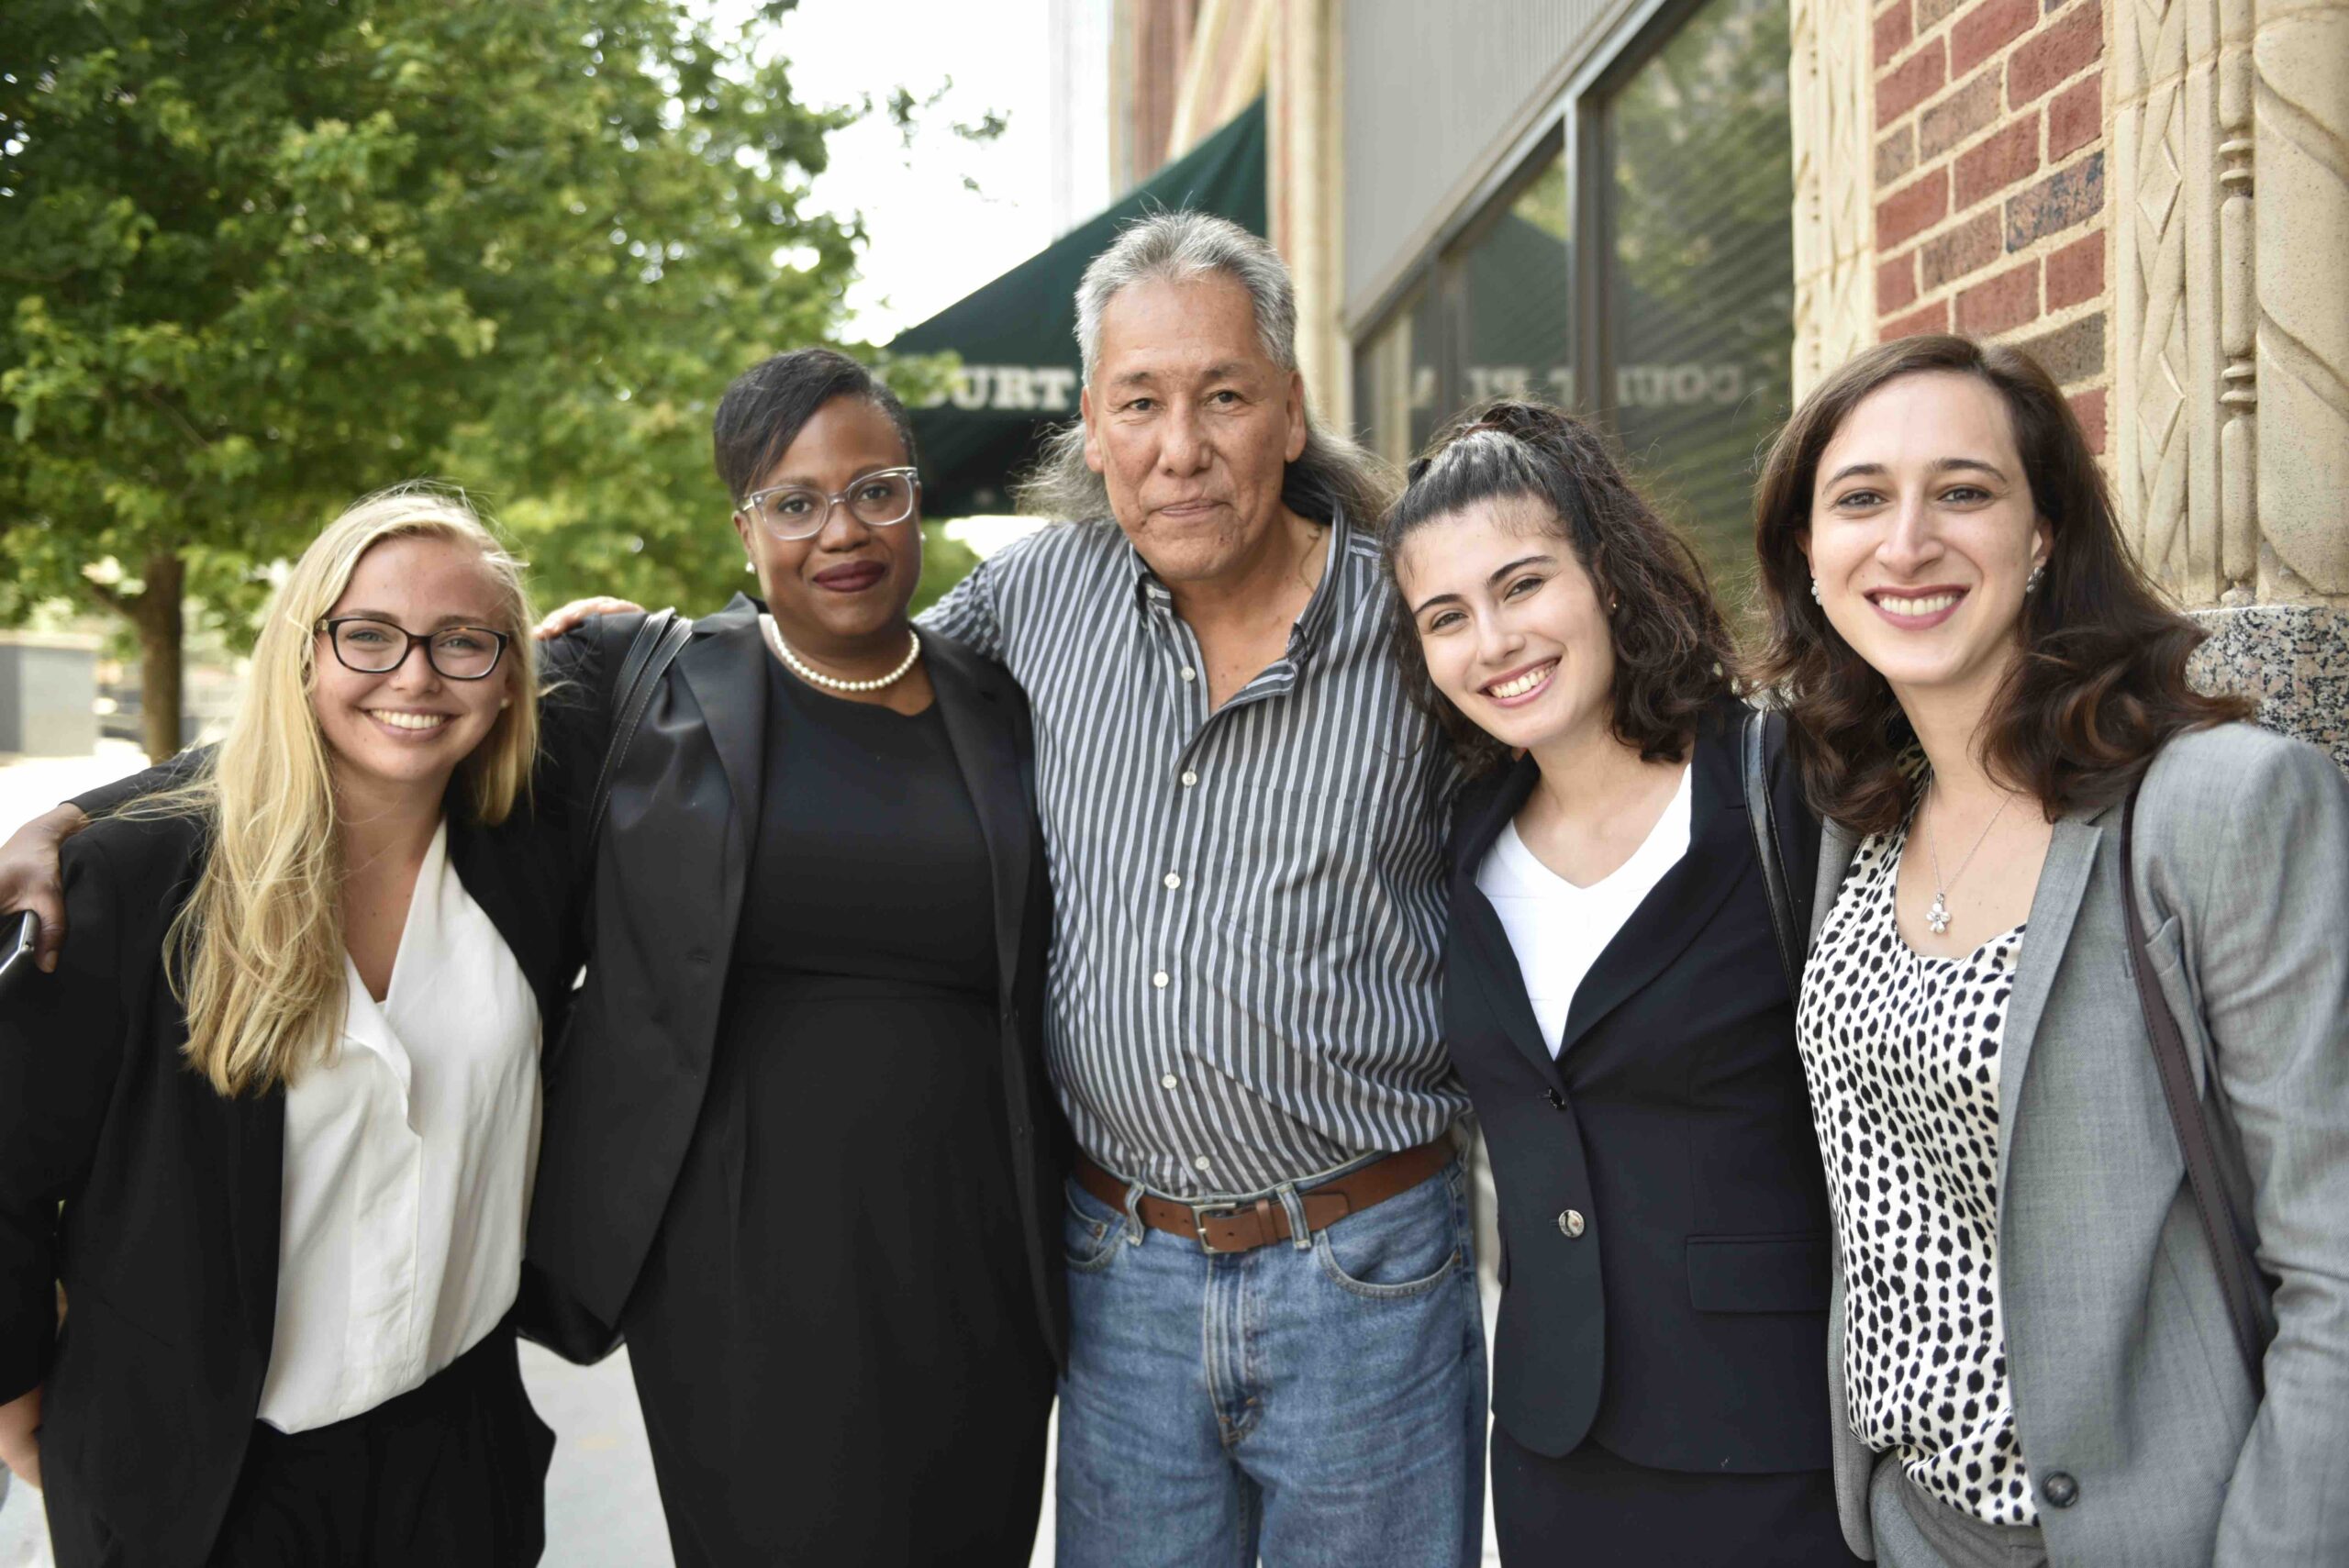 Tall Bear with his legal team from the Innocence Project (L-R): paralegal Corey Michon, senior staff attorney Karen Thompson, Cardozo law clinic student Natalia Mata and investigations attorney Dara Gell. Photo by Nick Oxford.